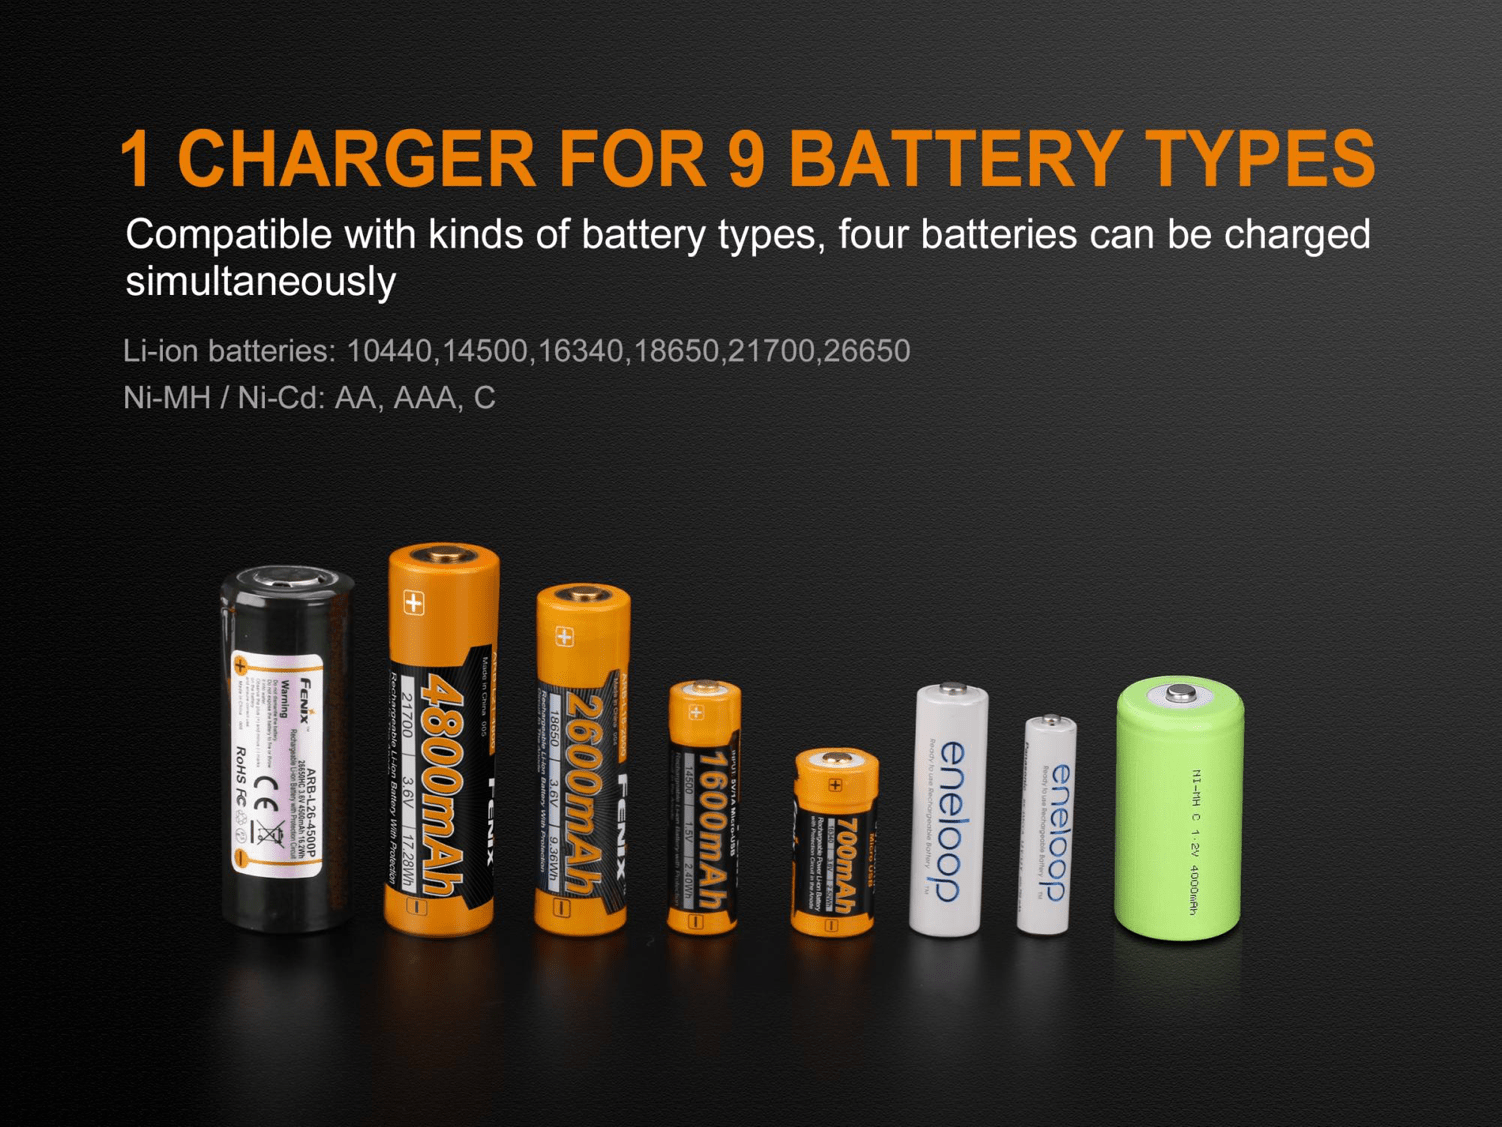 Fenix ARE A4, Four Slot Multifunctional Rechargeable Battery Charger, Compatible to Lithium Ion Batteries and Rechargeable Ni-MH and Ni-Cd AA, AAA, and C batteries, Charging and Discharging as power bank charger, Powerful 4 Battery Charger, Smart charger with LCD Screen Display